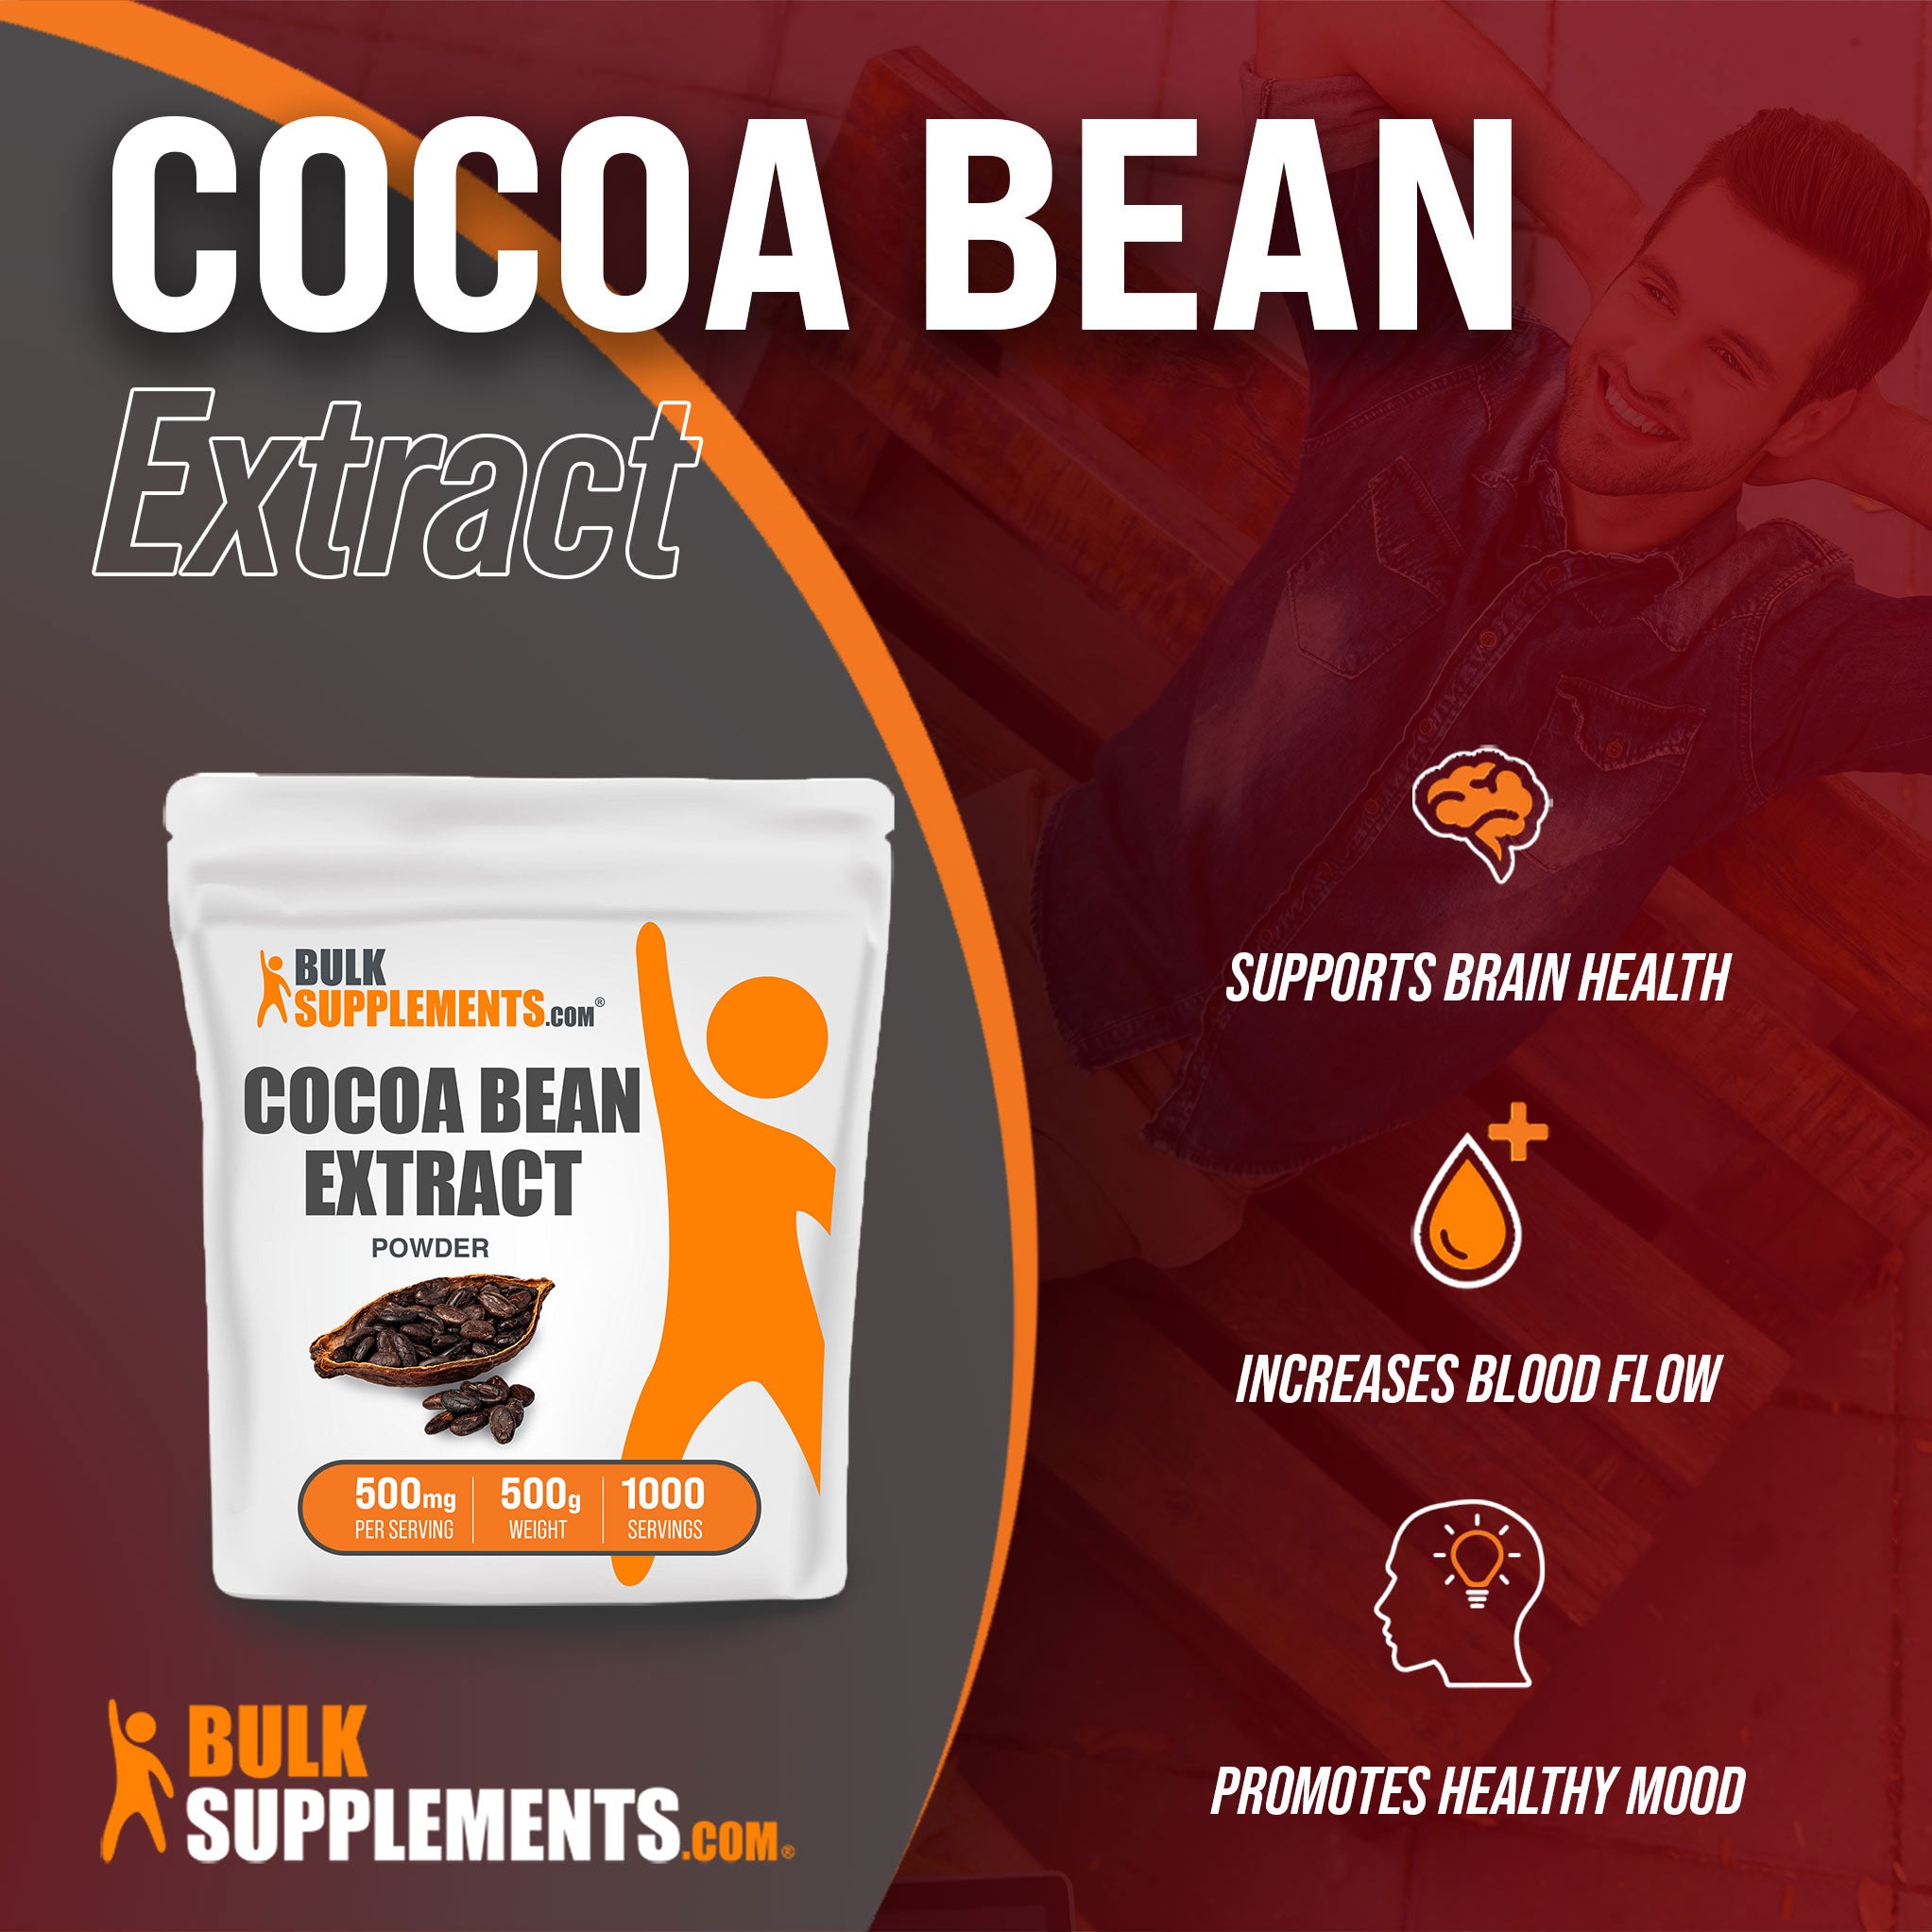 500g Cocoa Bean circulation supplements; supports brain health, increases blood flow, promotes healthy mood